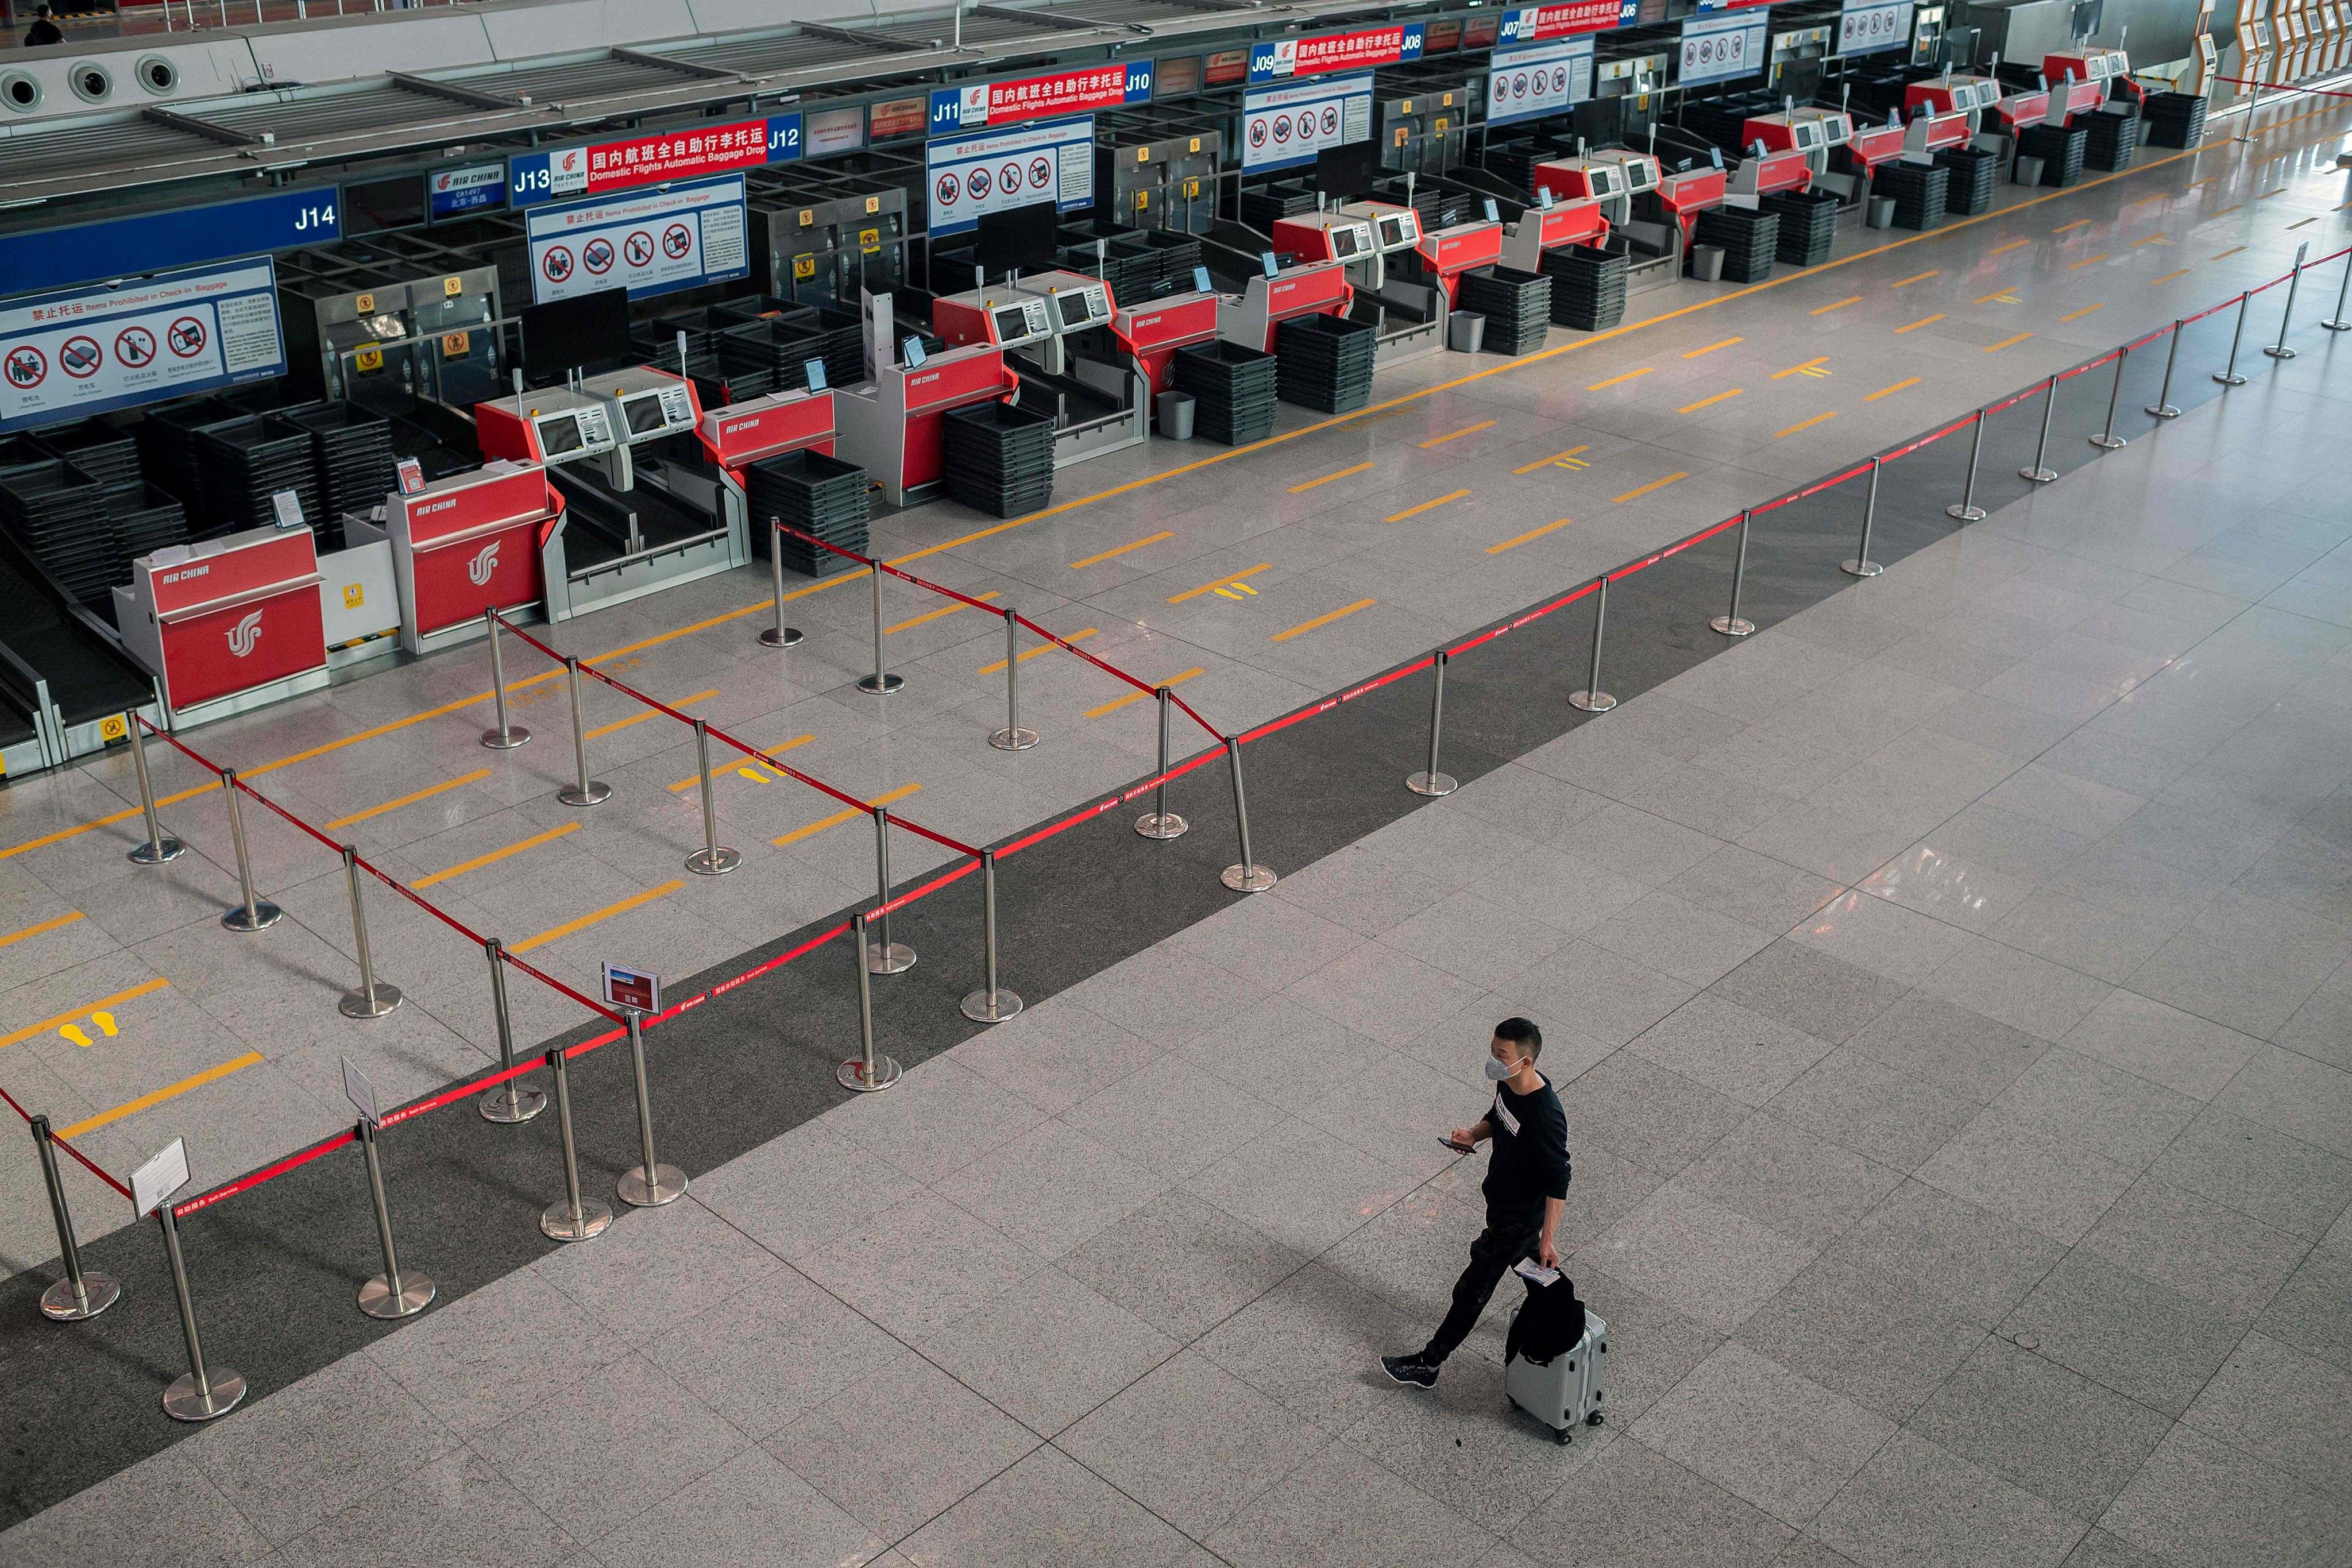 China’s aviation industry is set to receive emergency loans and subsidies to help offset damage caused by the pandemic. Photo: AFP